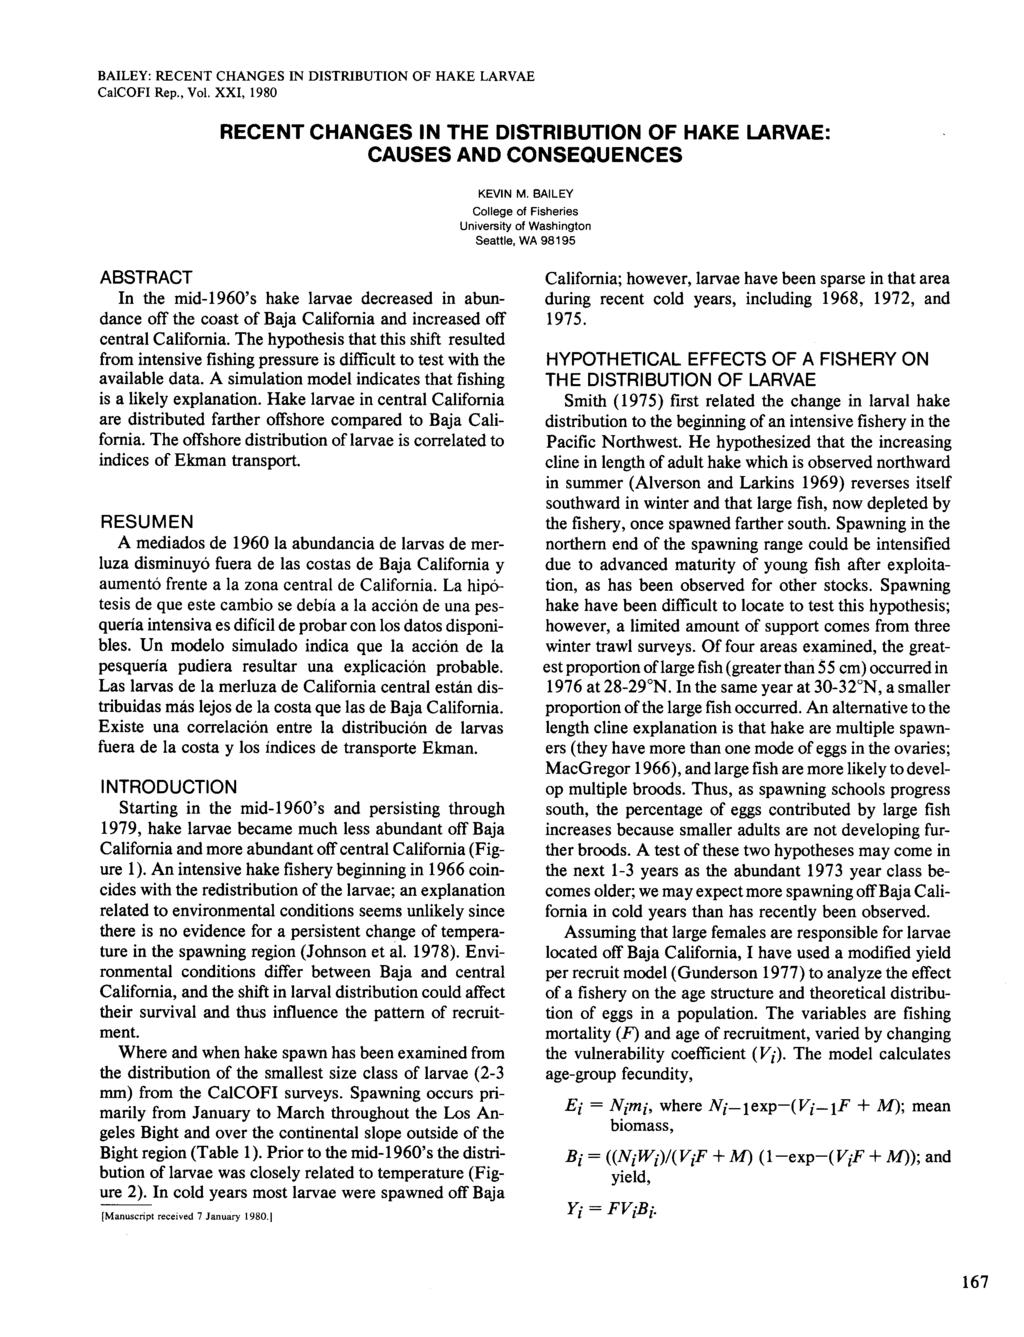 CalCOFI Rep., Vol. XXI, 198 RECENT CHANGES IN THE DISTRIBUTION OF HAKE LARVAE: CAUSES AND CONSEQUENCES KEVIN M.